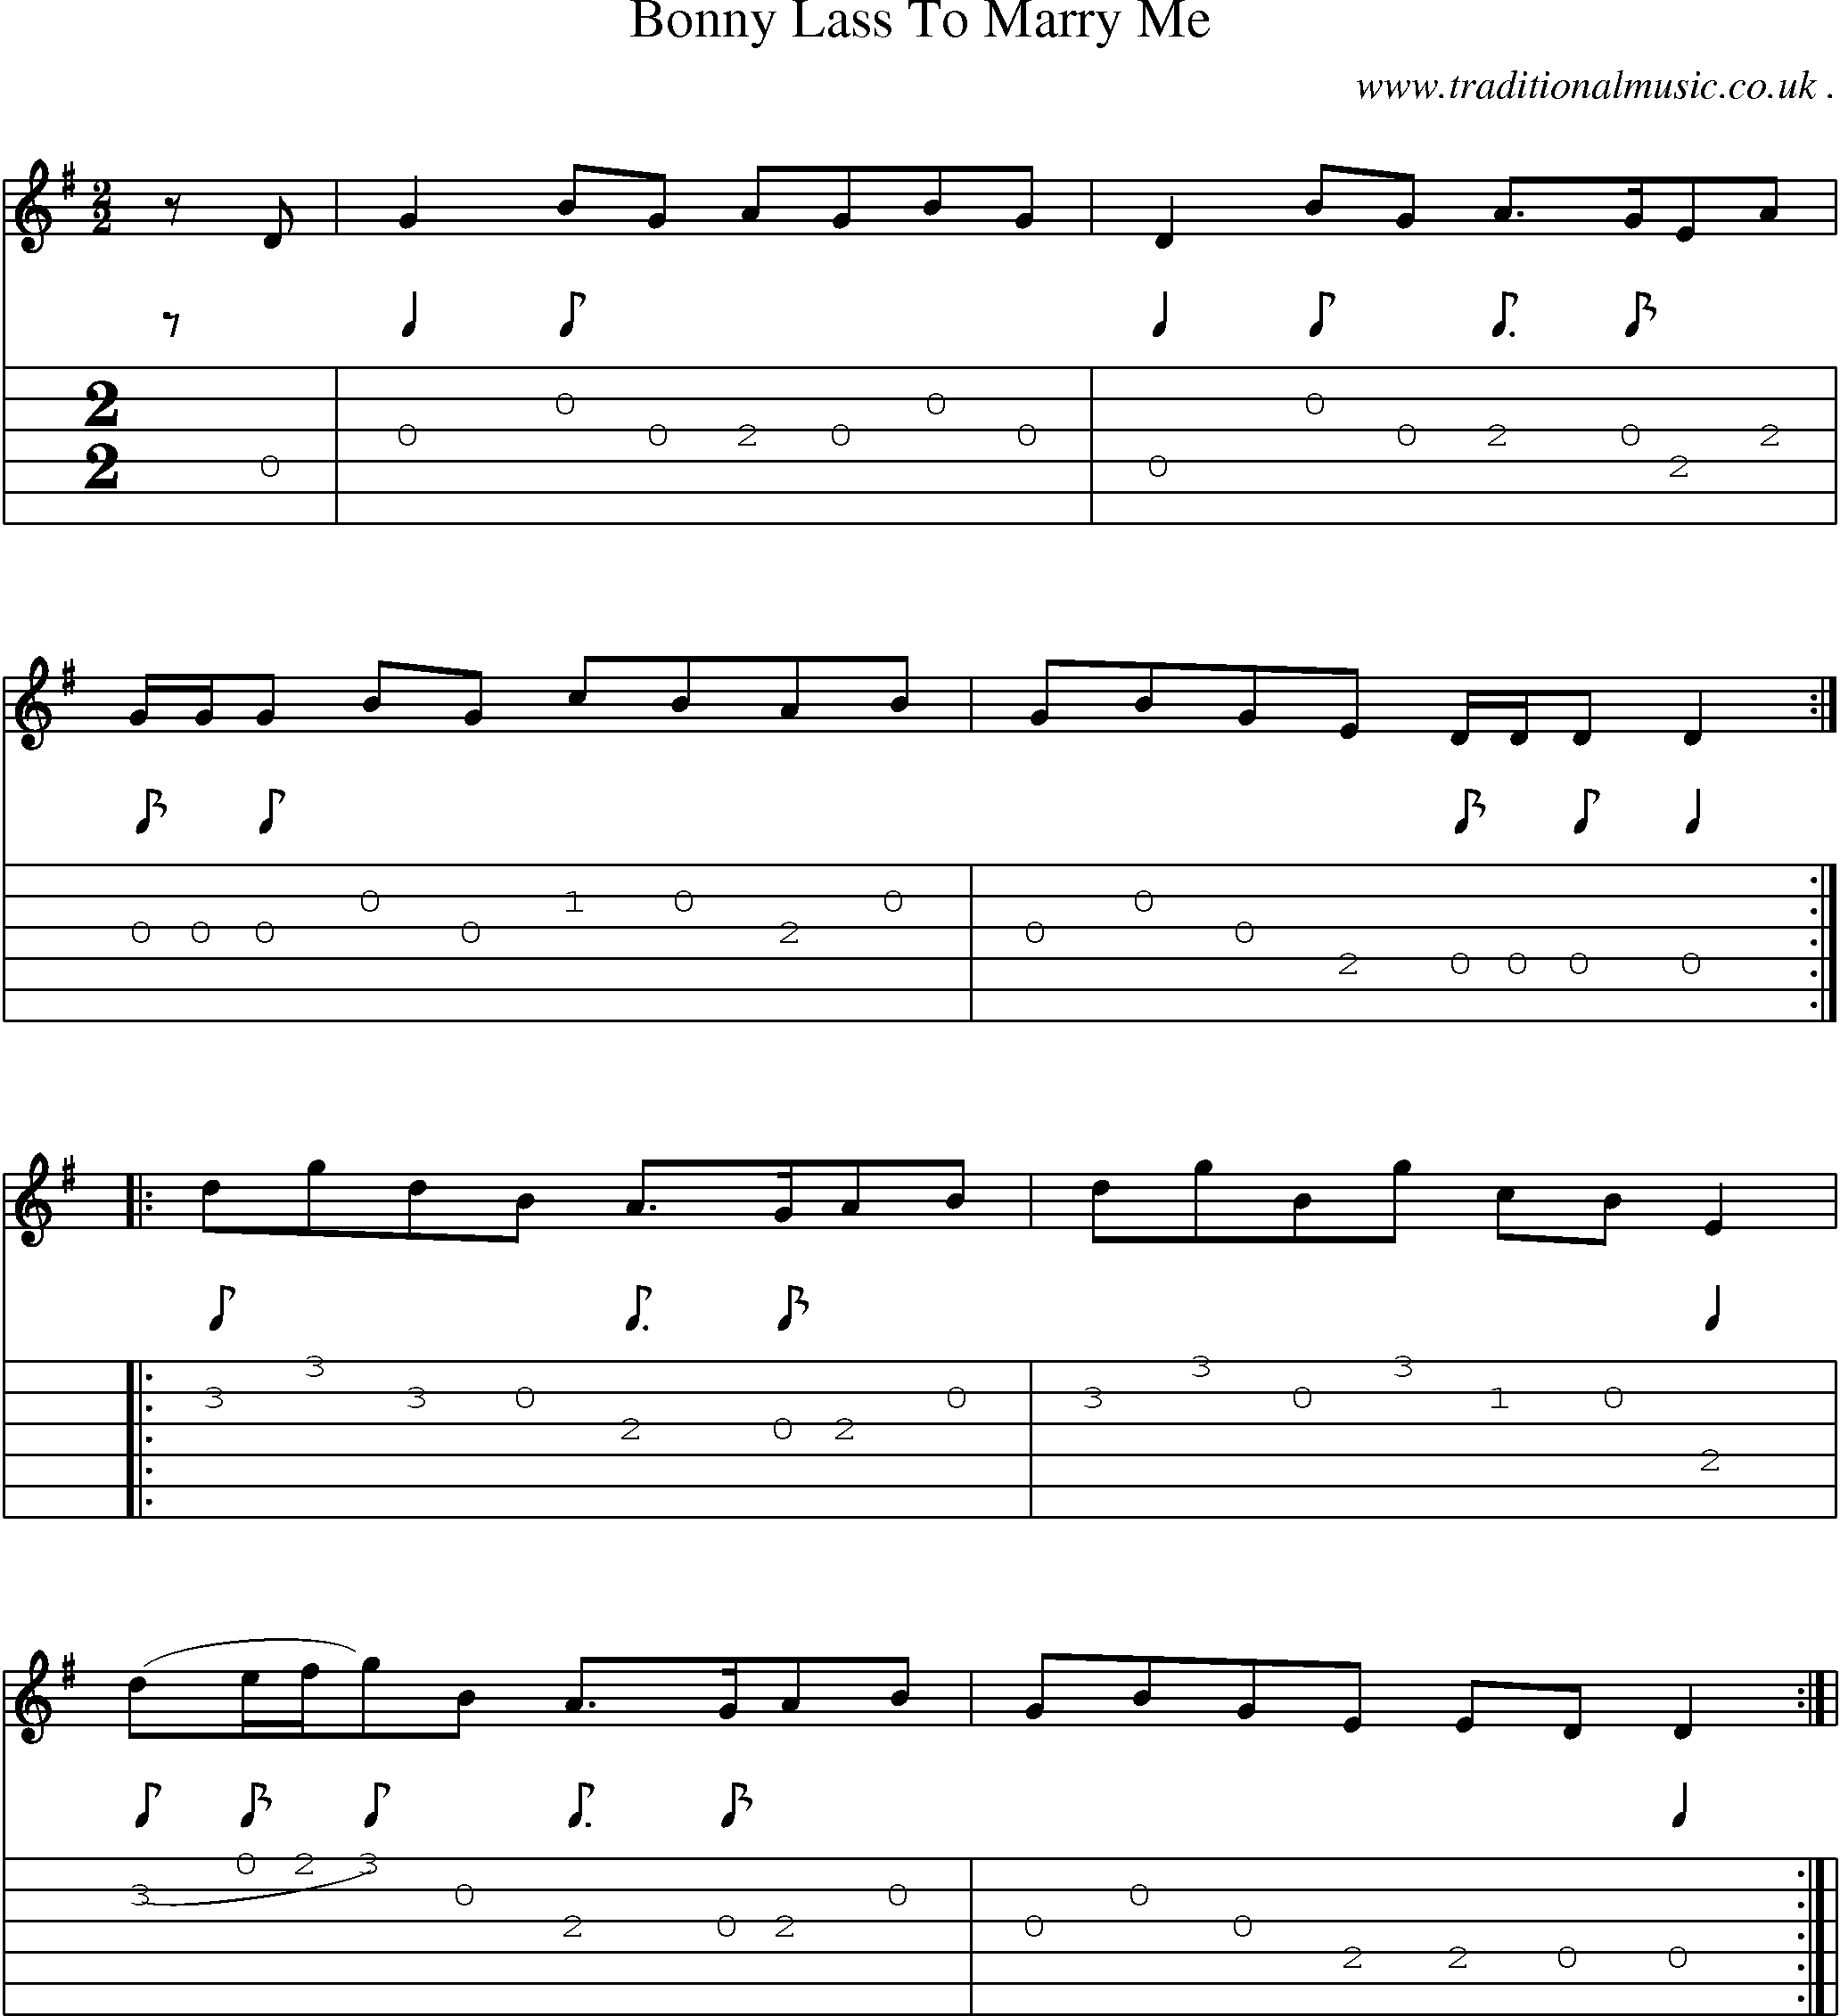 Sheet-Music and Guitar Tabs for Bonny Lass To Marry Me